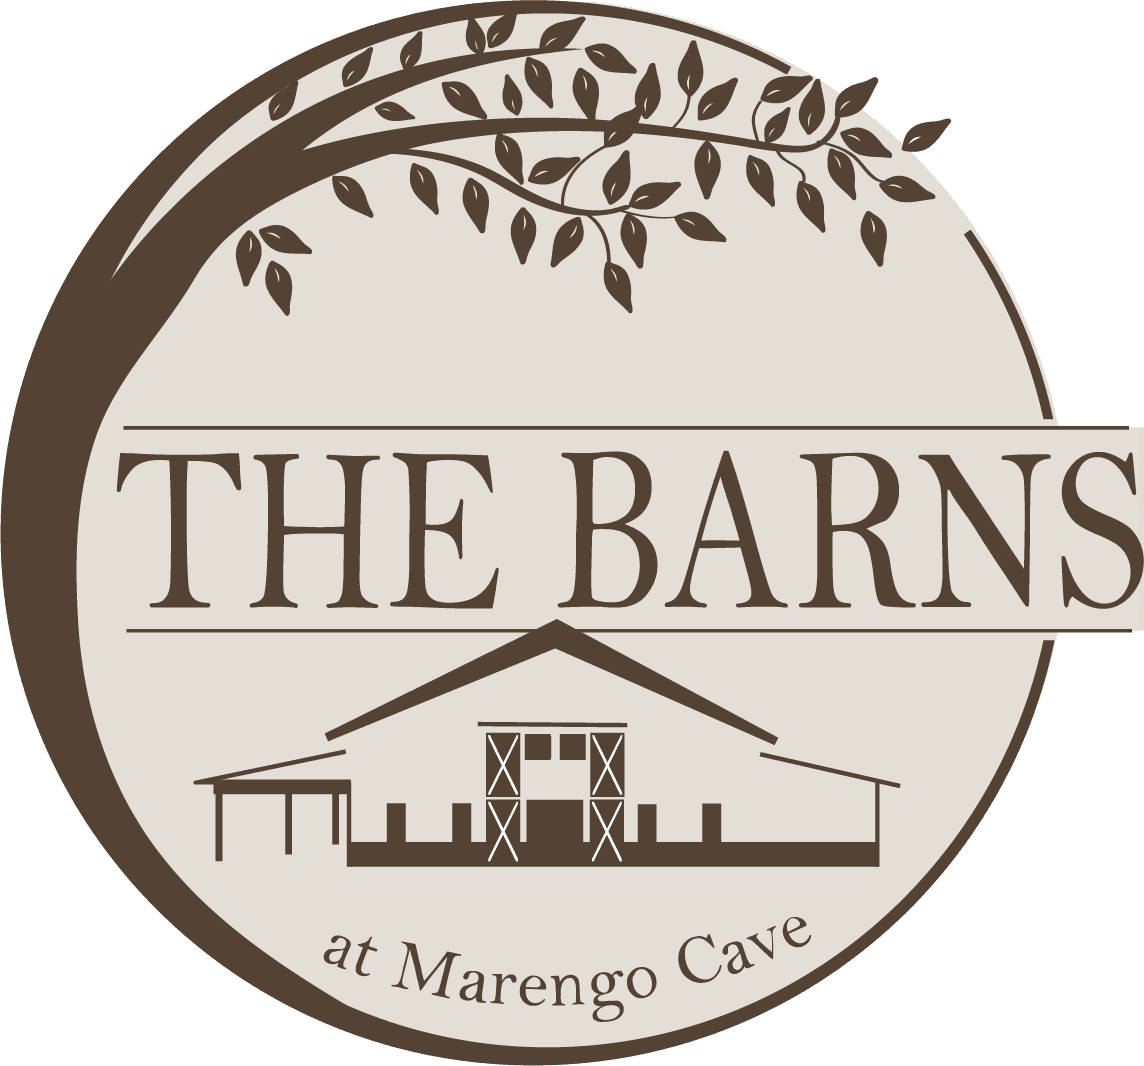 The Barns at Marengo Cave